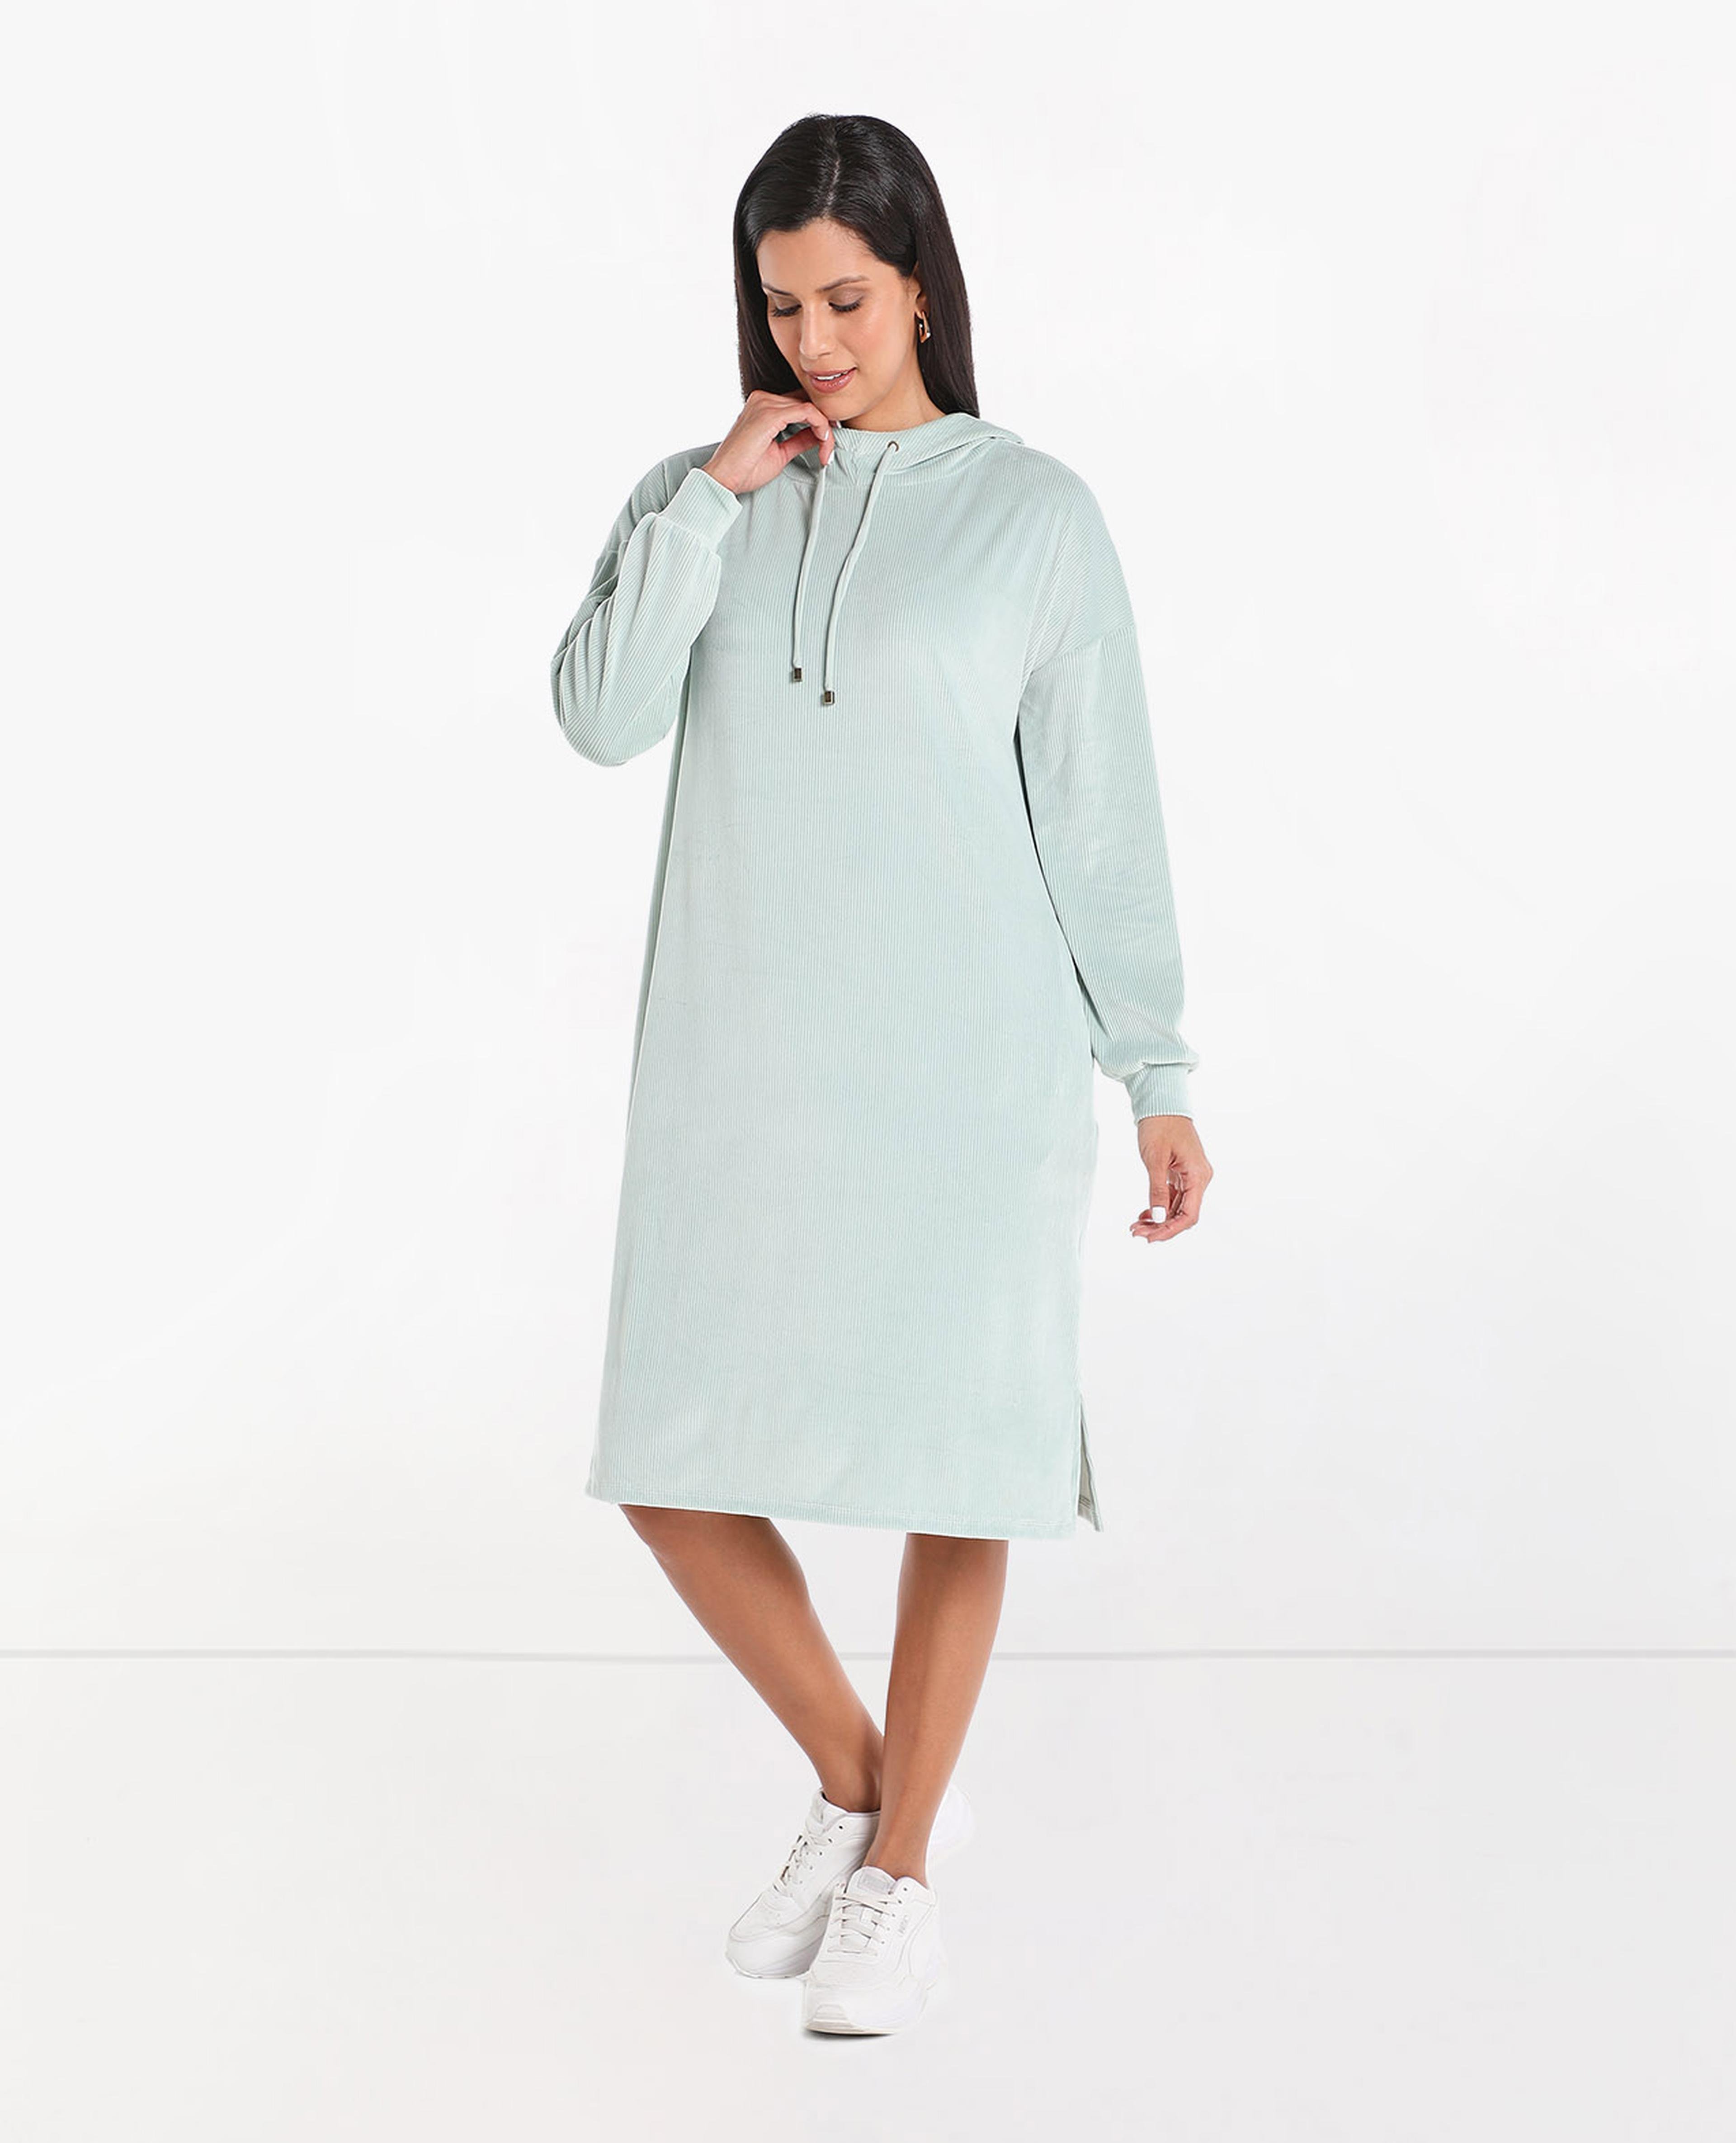 Solid Hooded Sweatshirt Dress with side slits